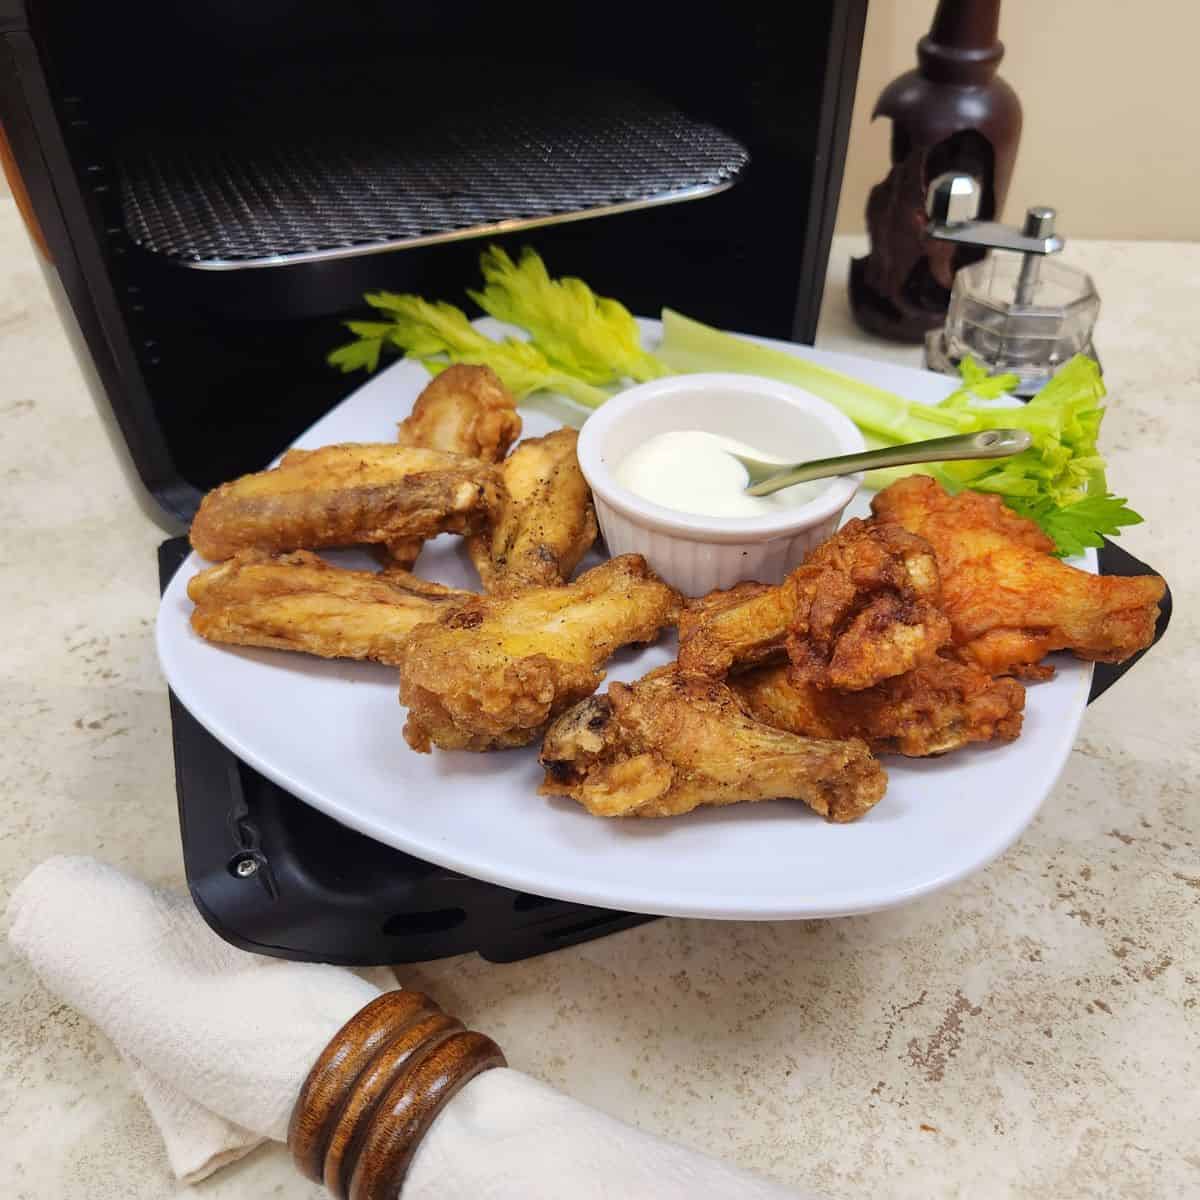 how to reheat wings in an air fryer